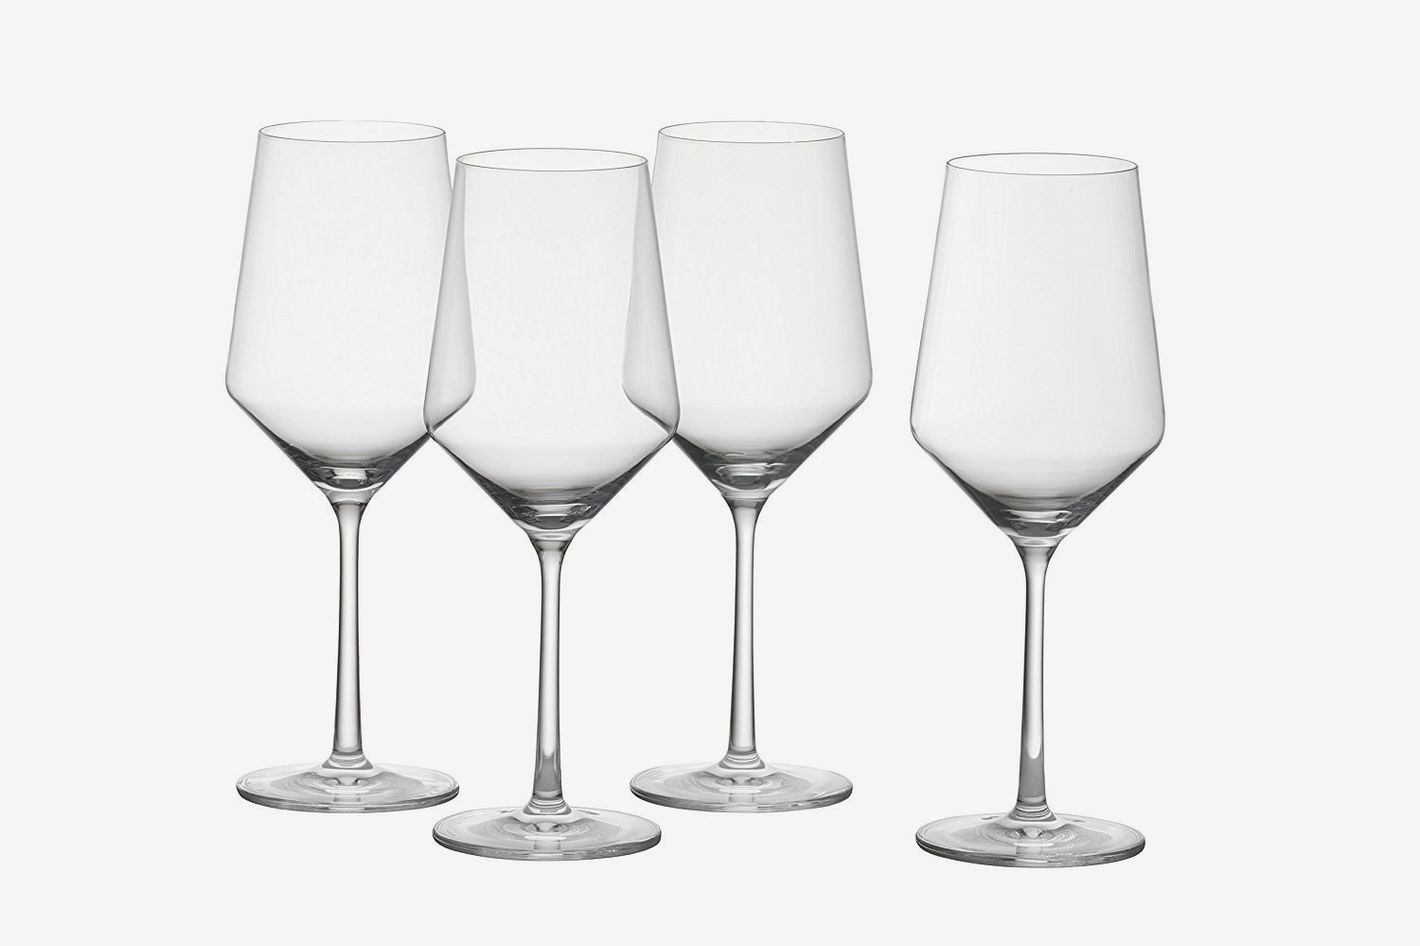 Image result for wine glass with big bowls and narrow mouths